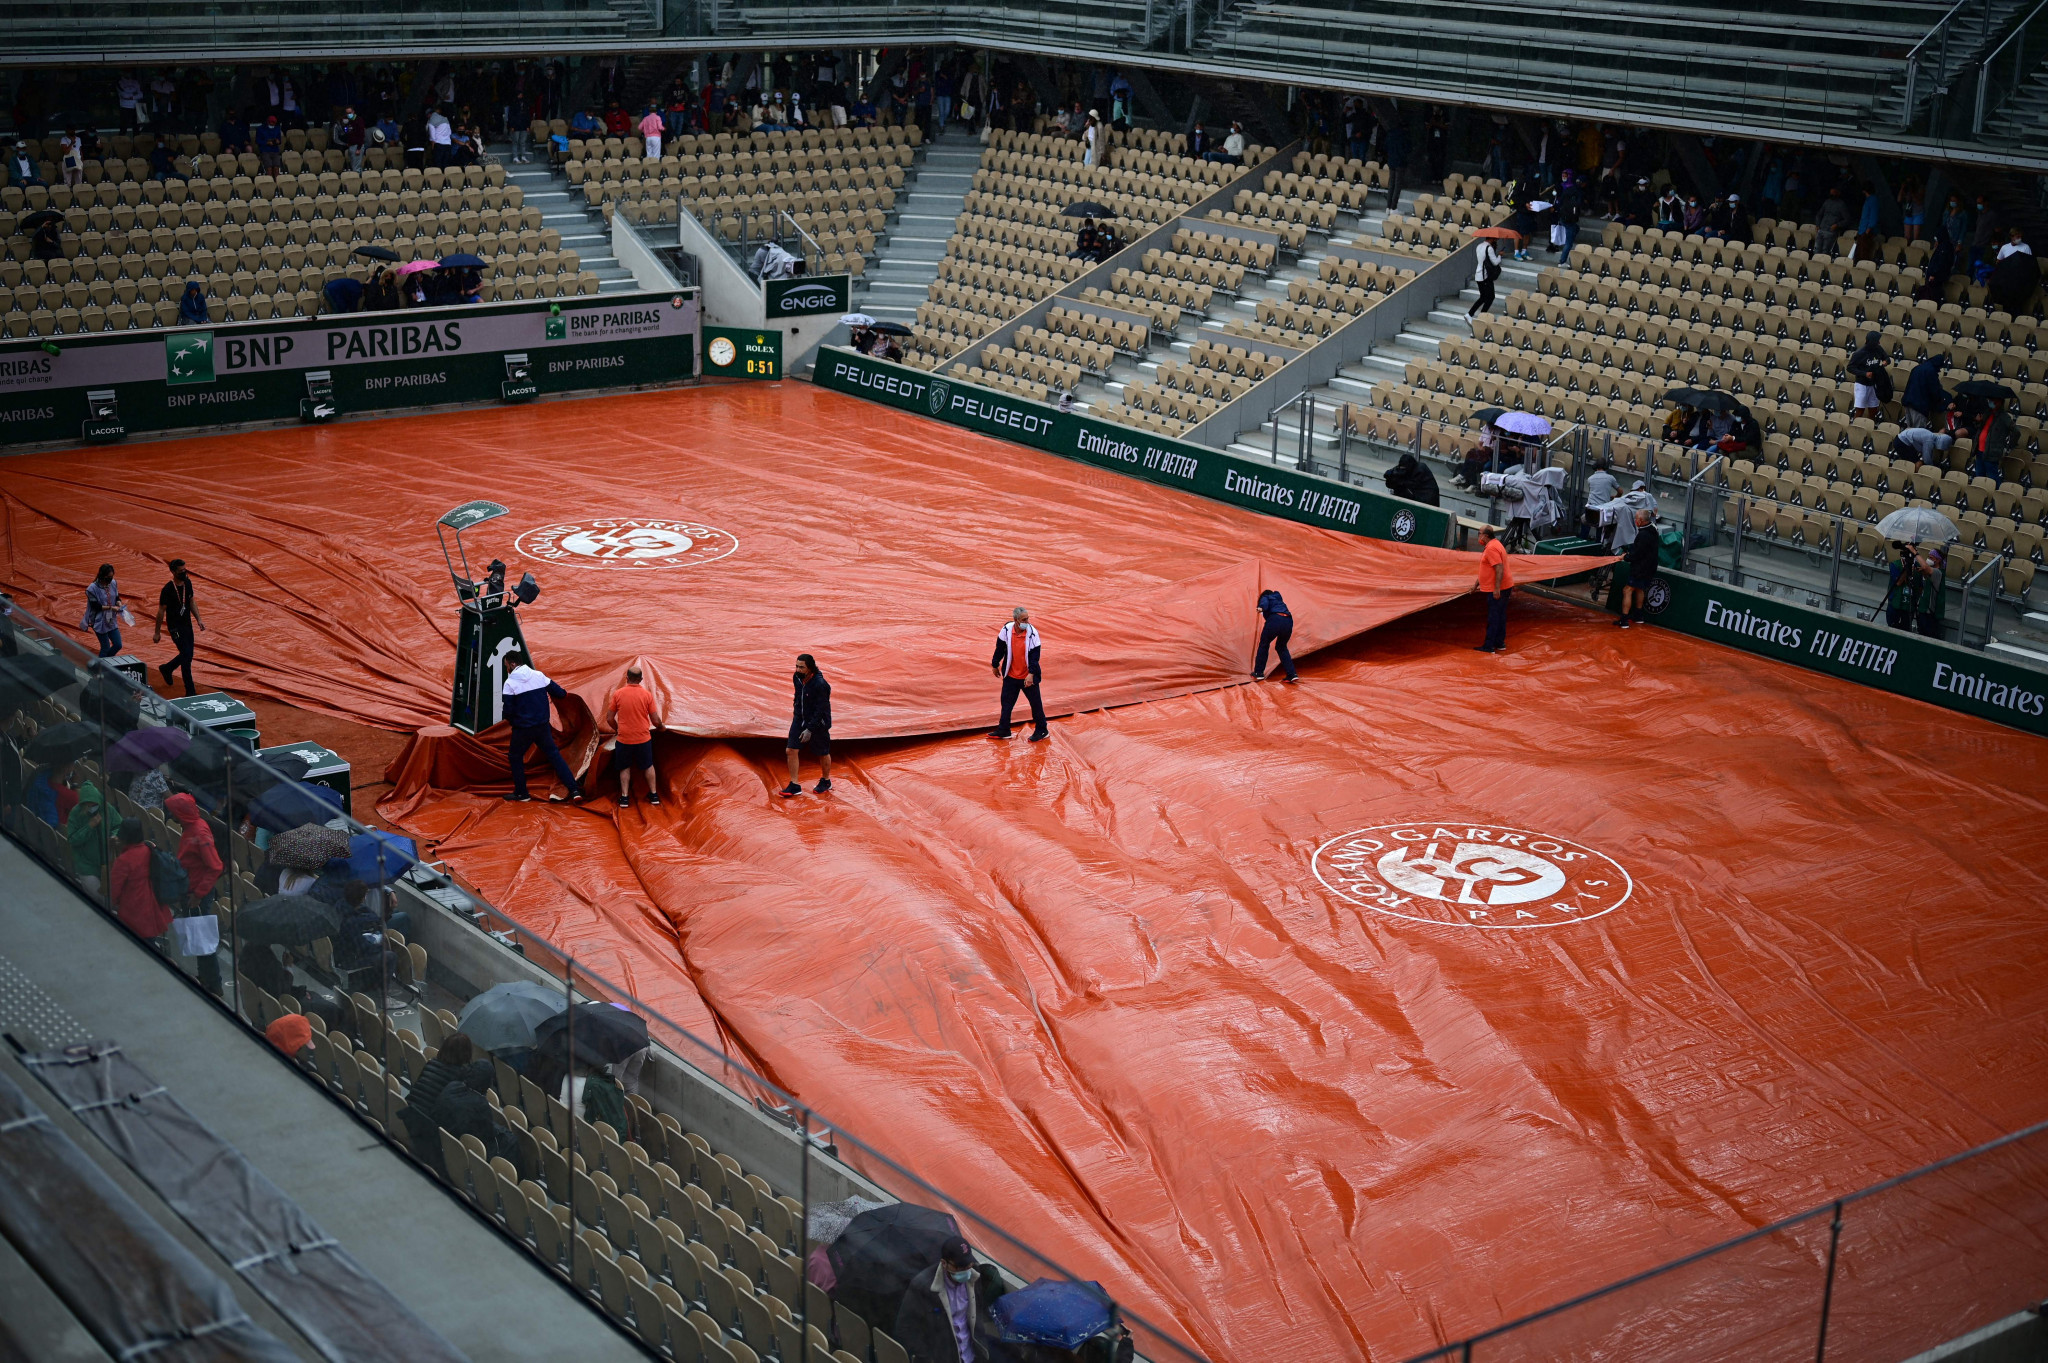 Groundstaff members pull covers across the Simonne Mathieu court as rain falls ©Getty Images